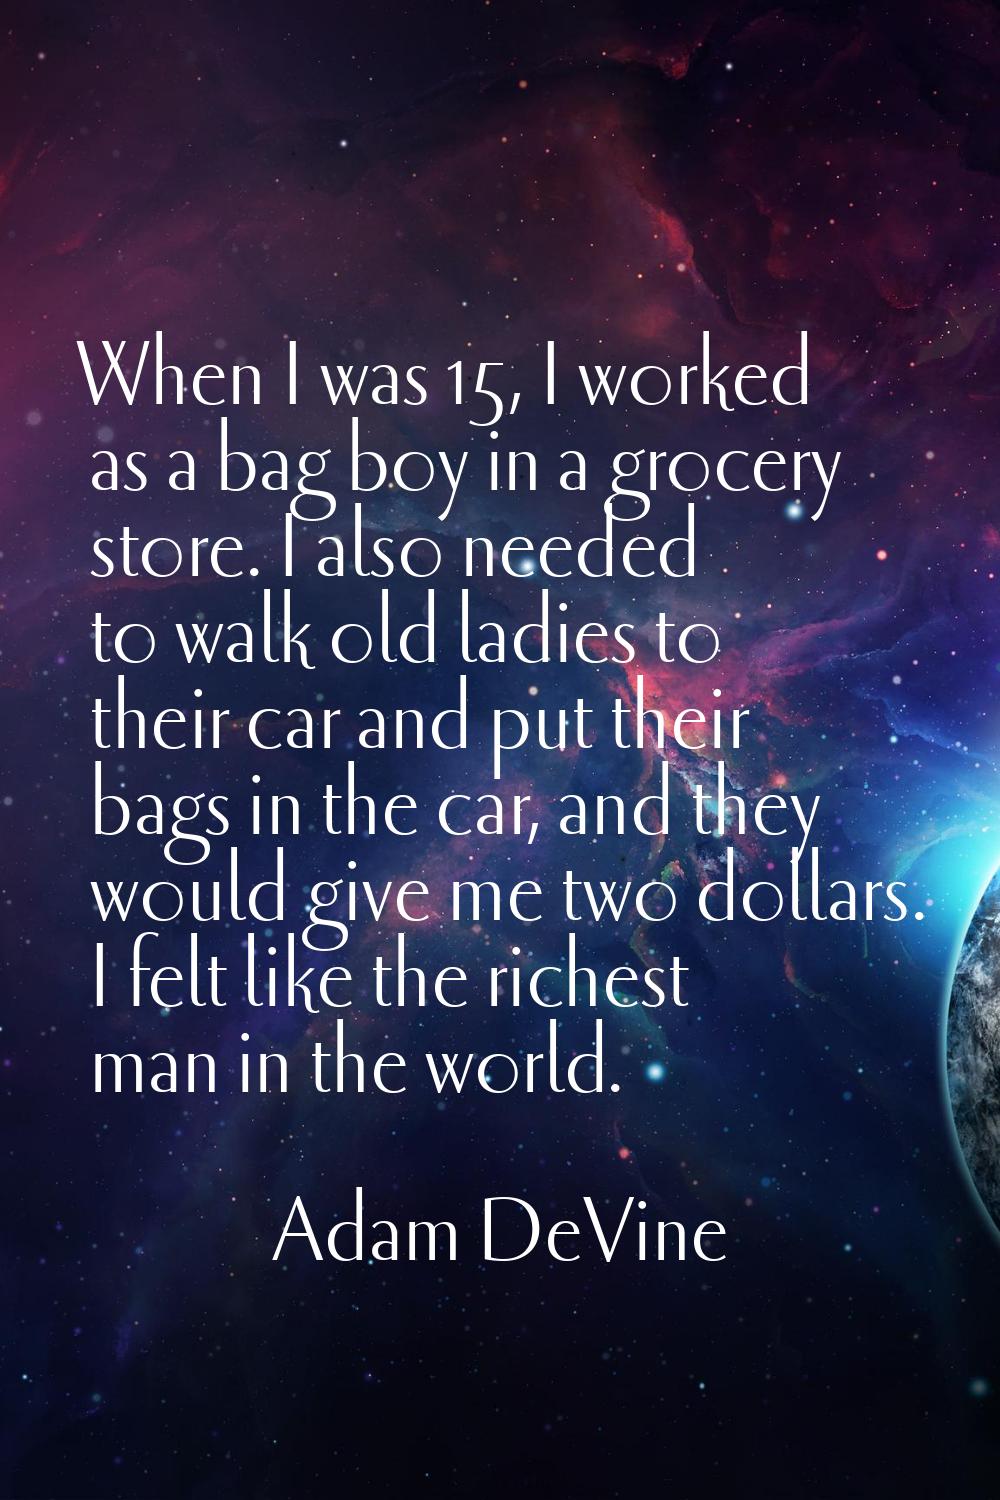 When I was 15, I worked as a bag boy in a grocery store. I also needed to walk old ladies to their 